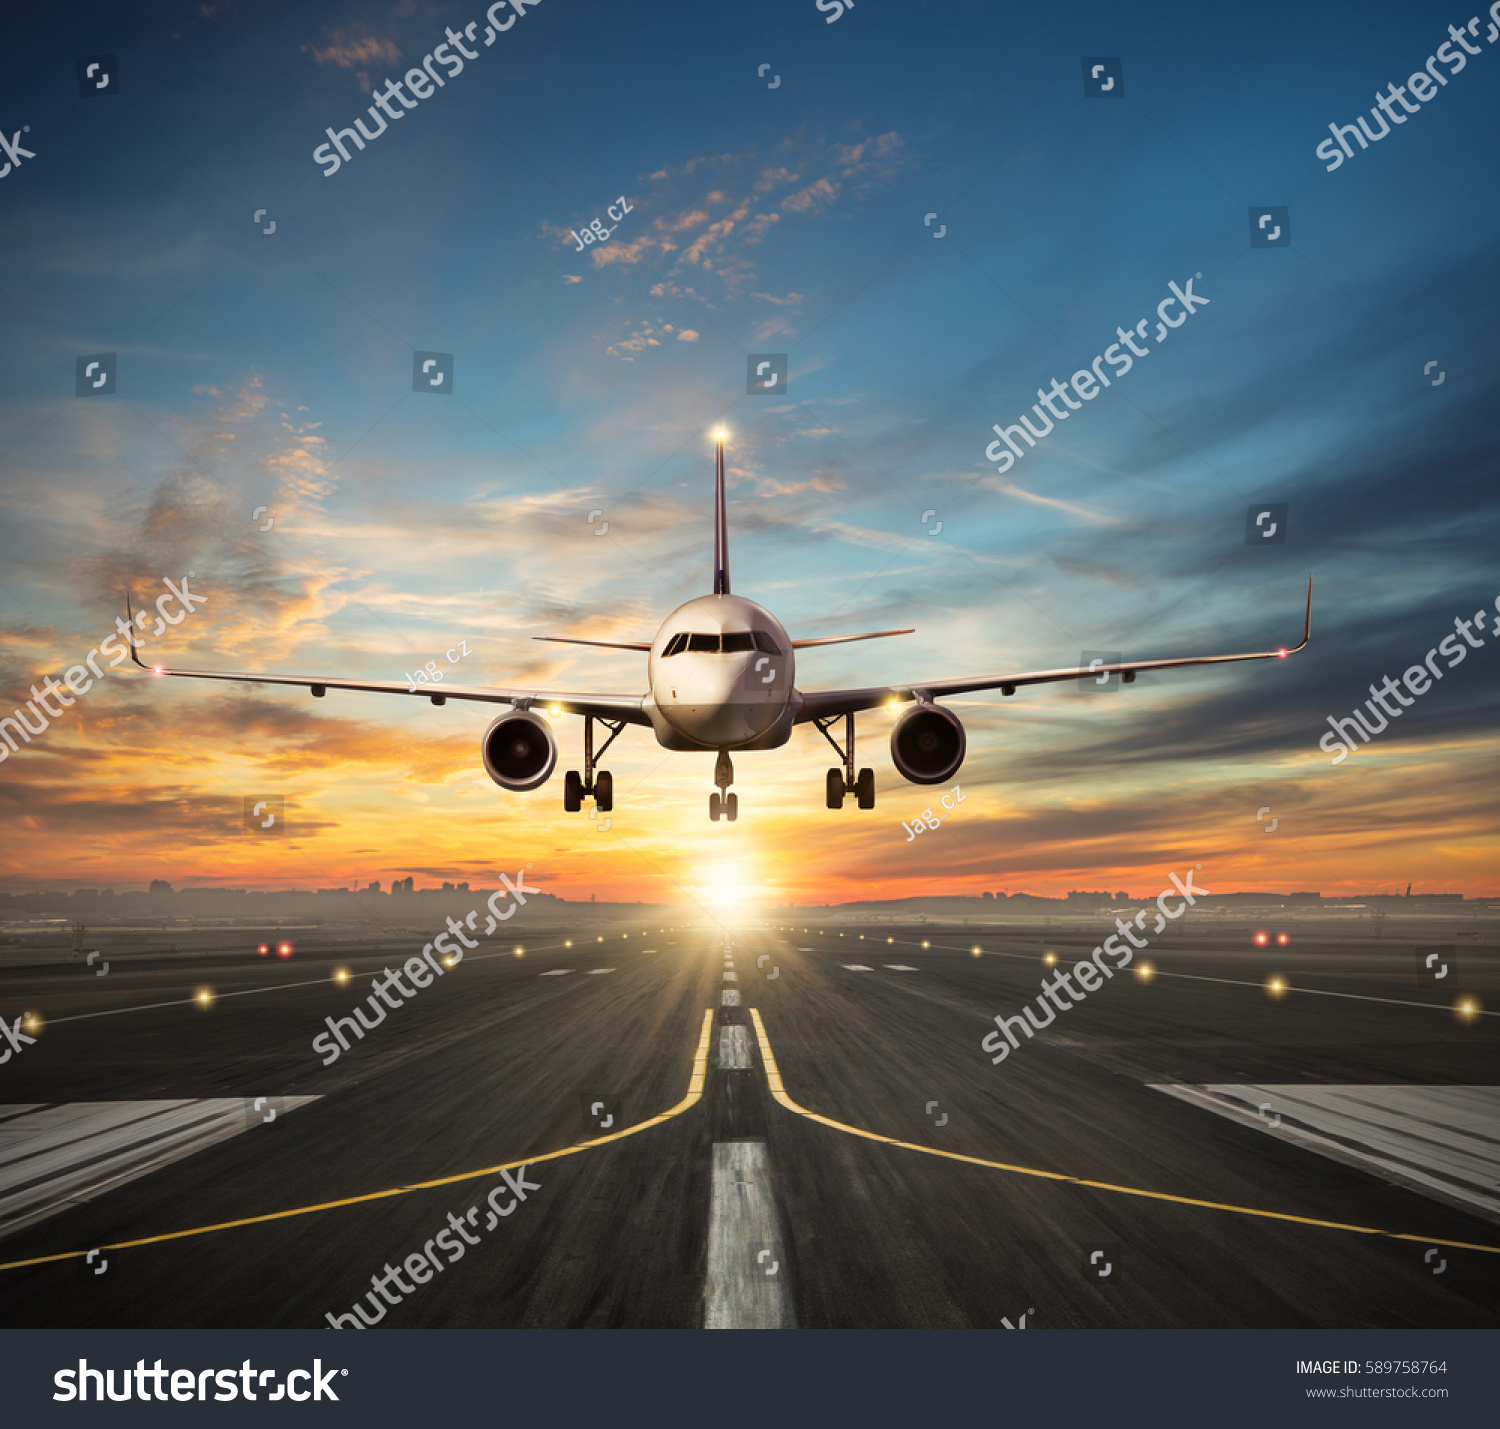 powerpoint-template-airline-aviation-passengers-airplane-mpuomponl